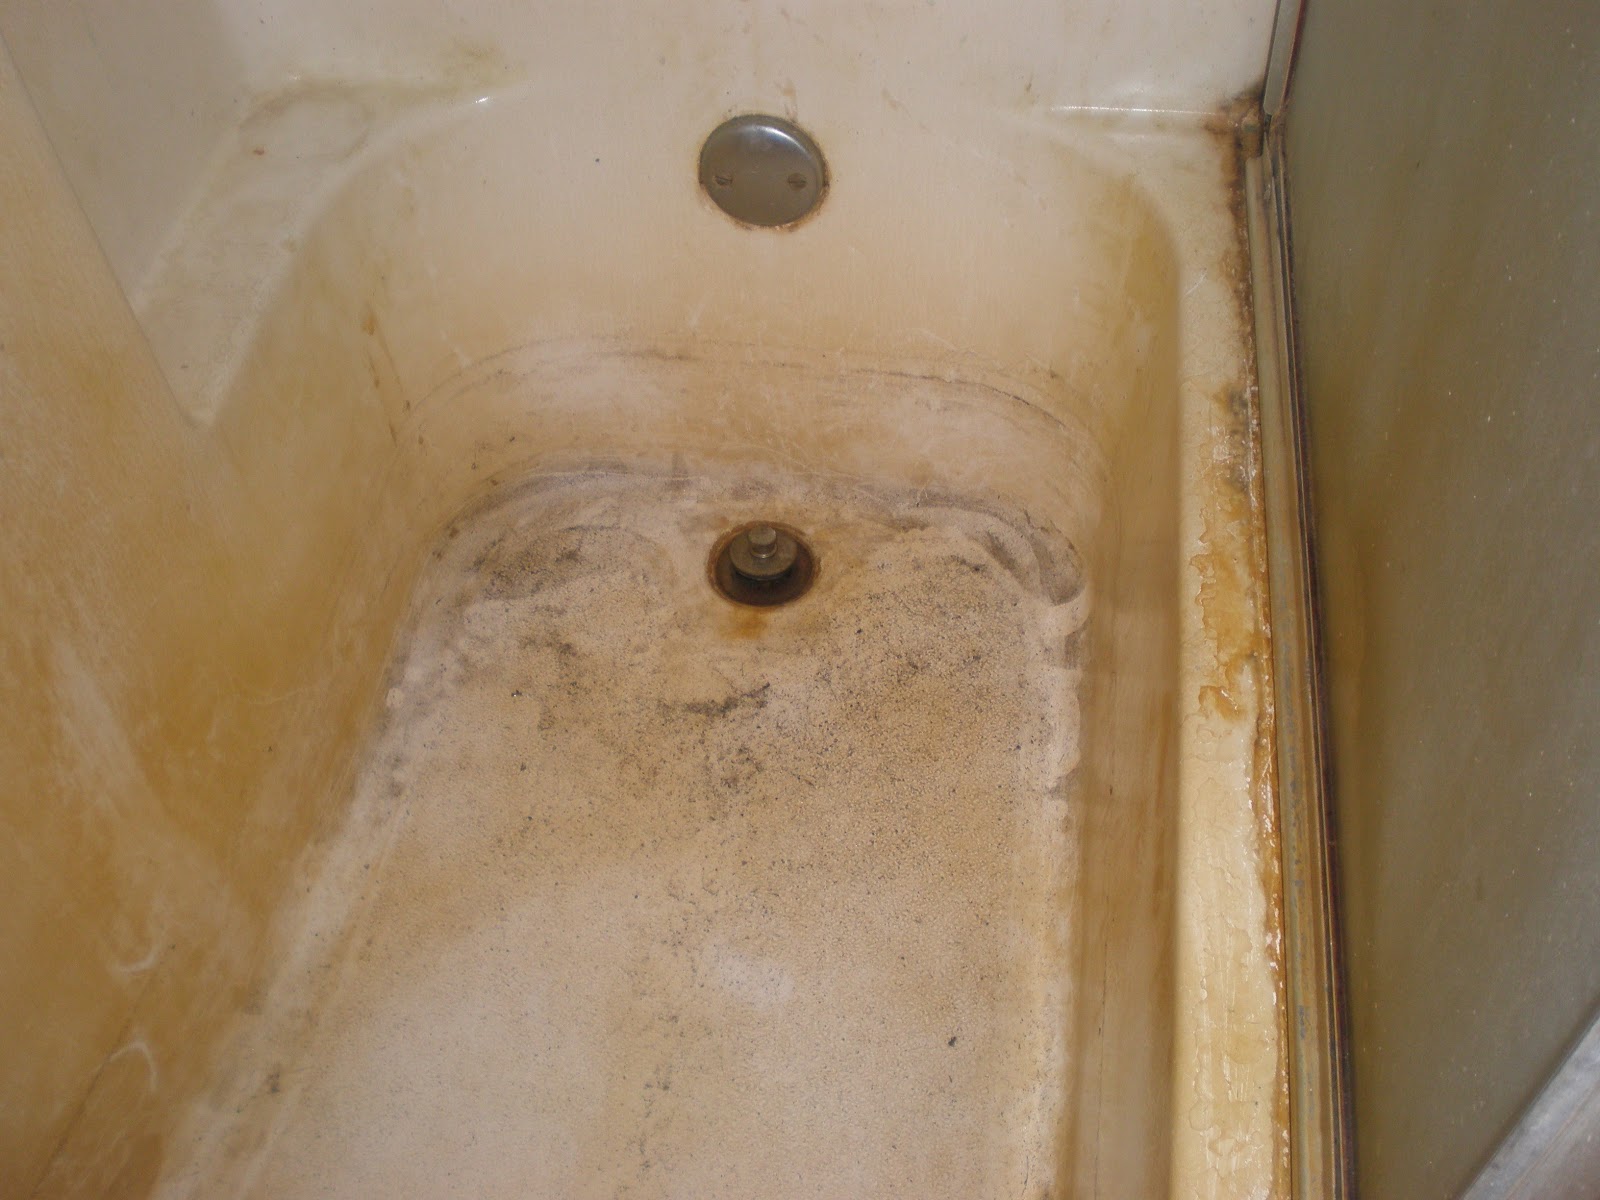 A Tub And Sink Cleaner That Takes Away Rust And Lime And